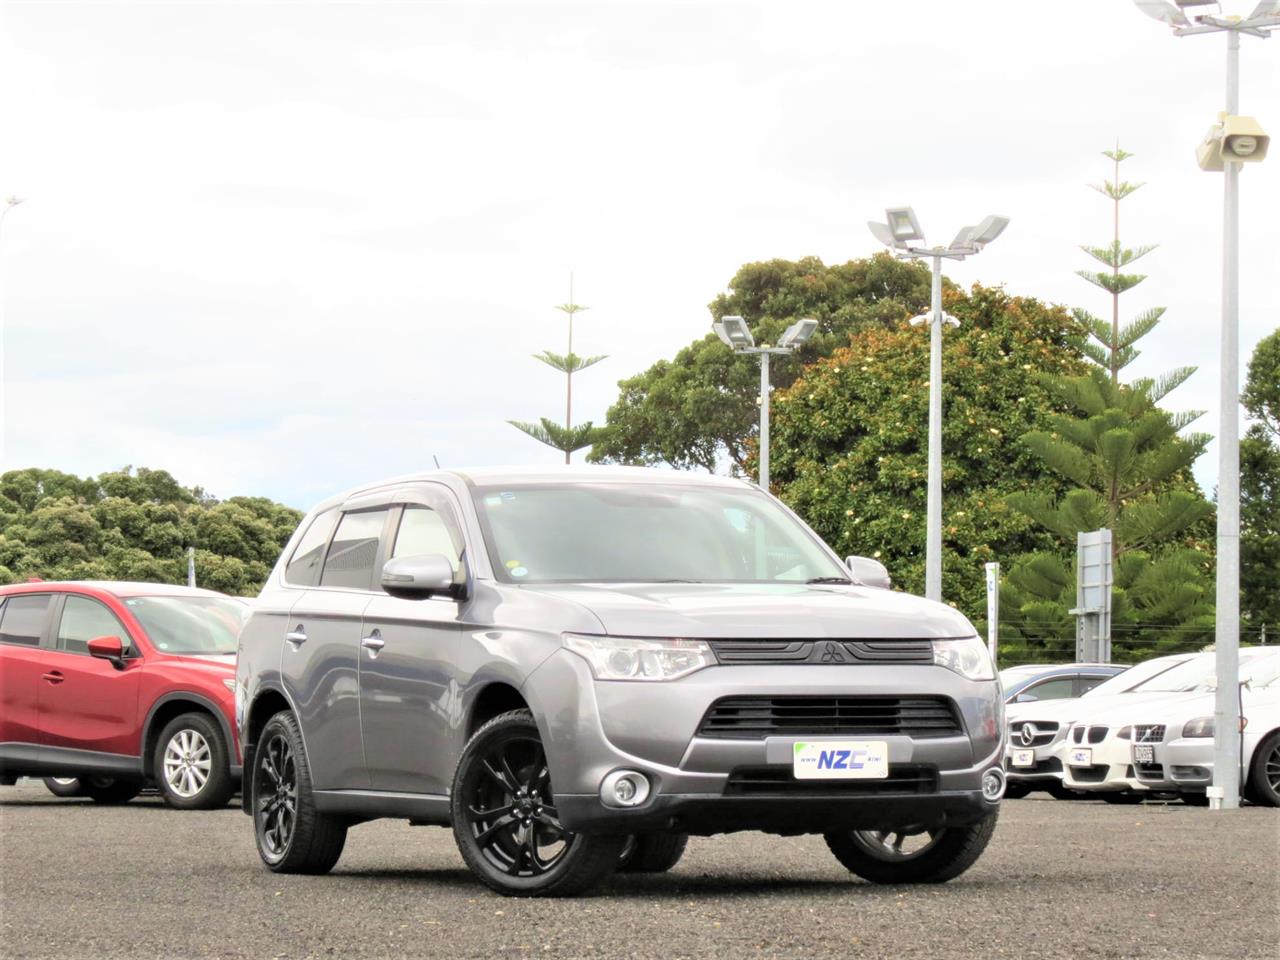 NZC 2012 Mitsubishi Outlander just arrived to Auckland